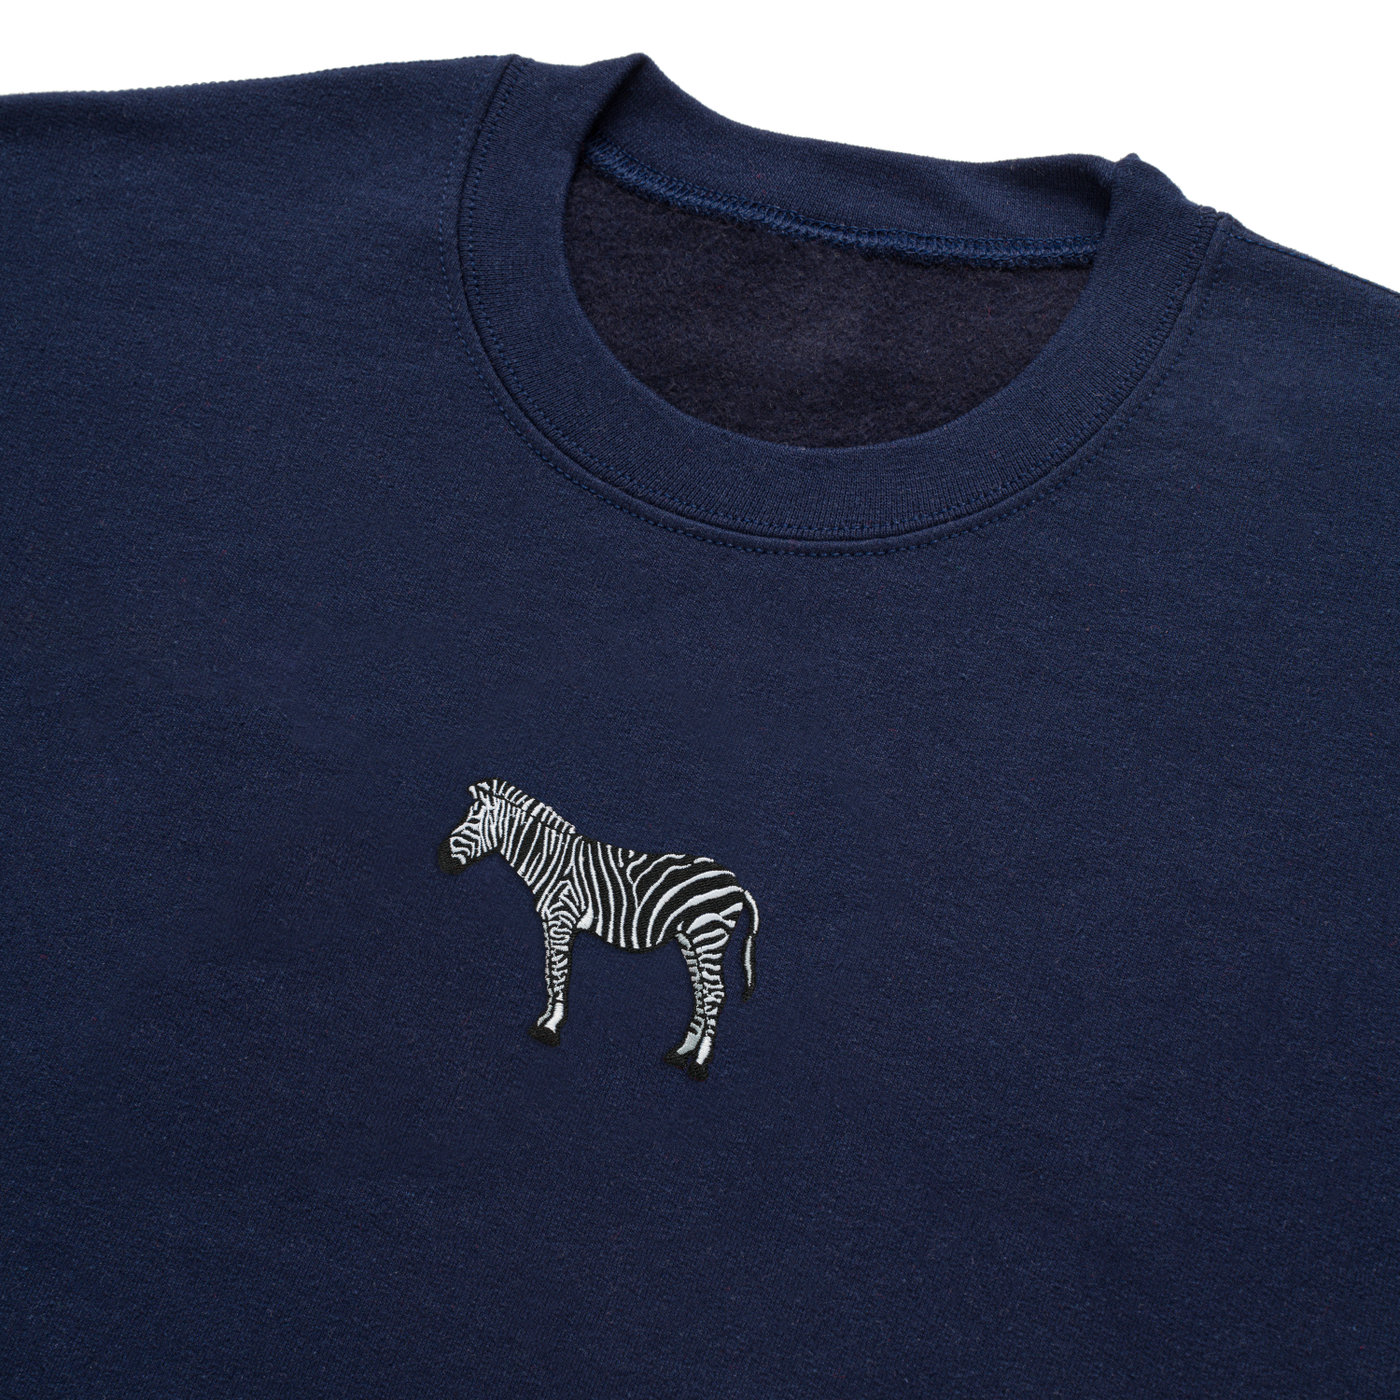 Bobby's Planet Men's Embroidered Zebra Sweatshirt from African Animals Collection in Navy Color#color_navy